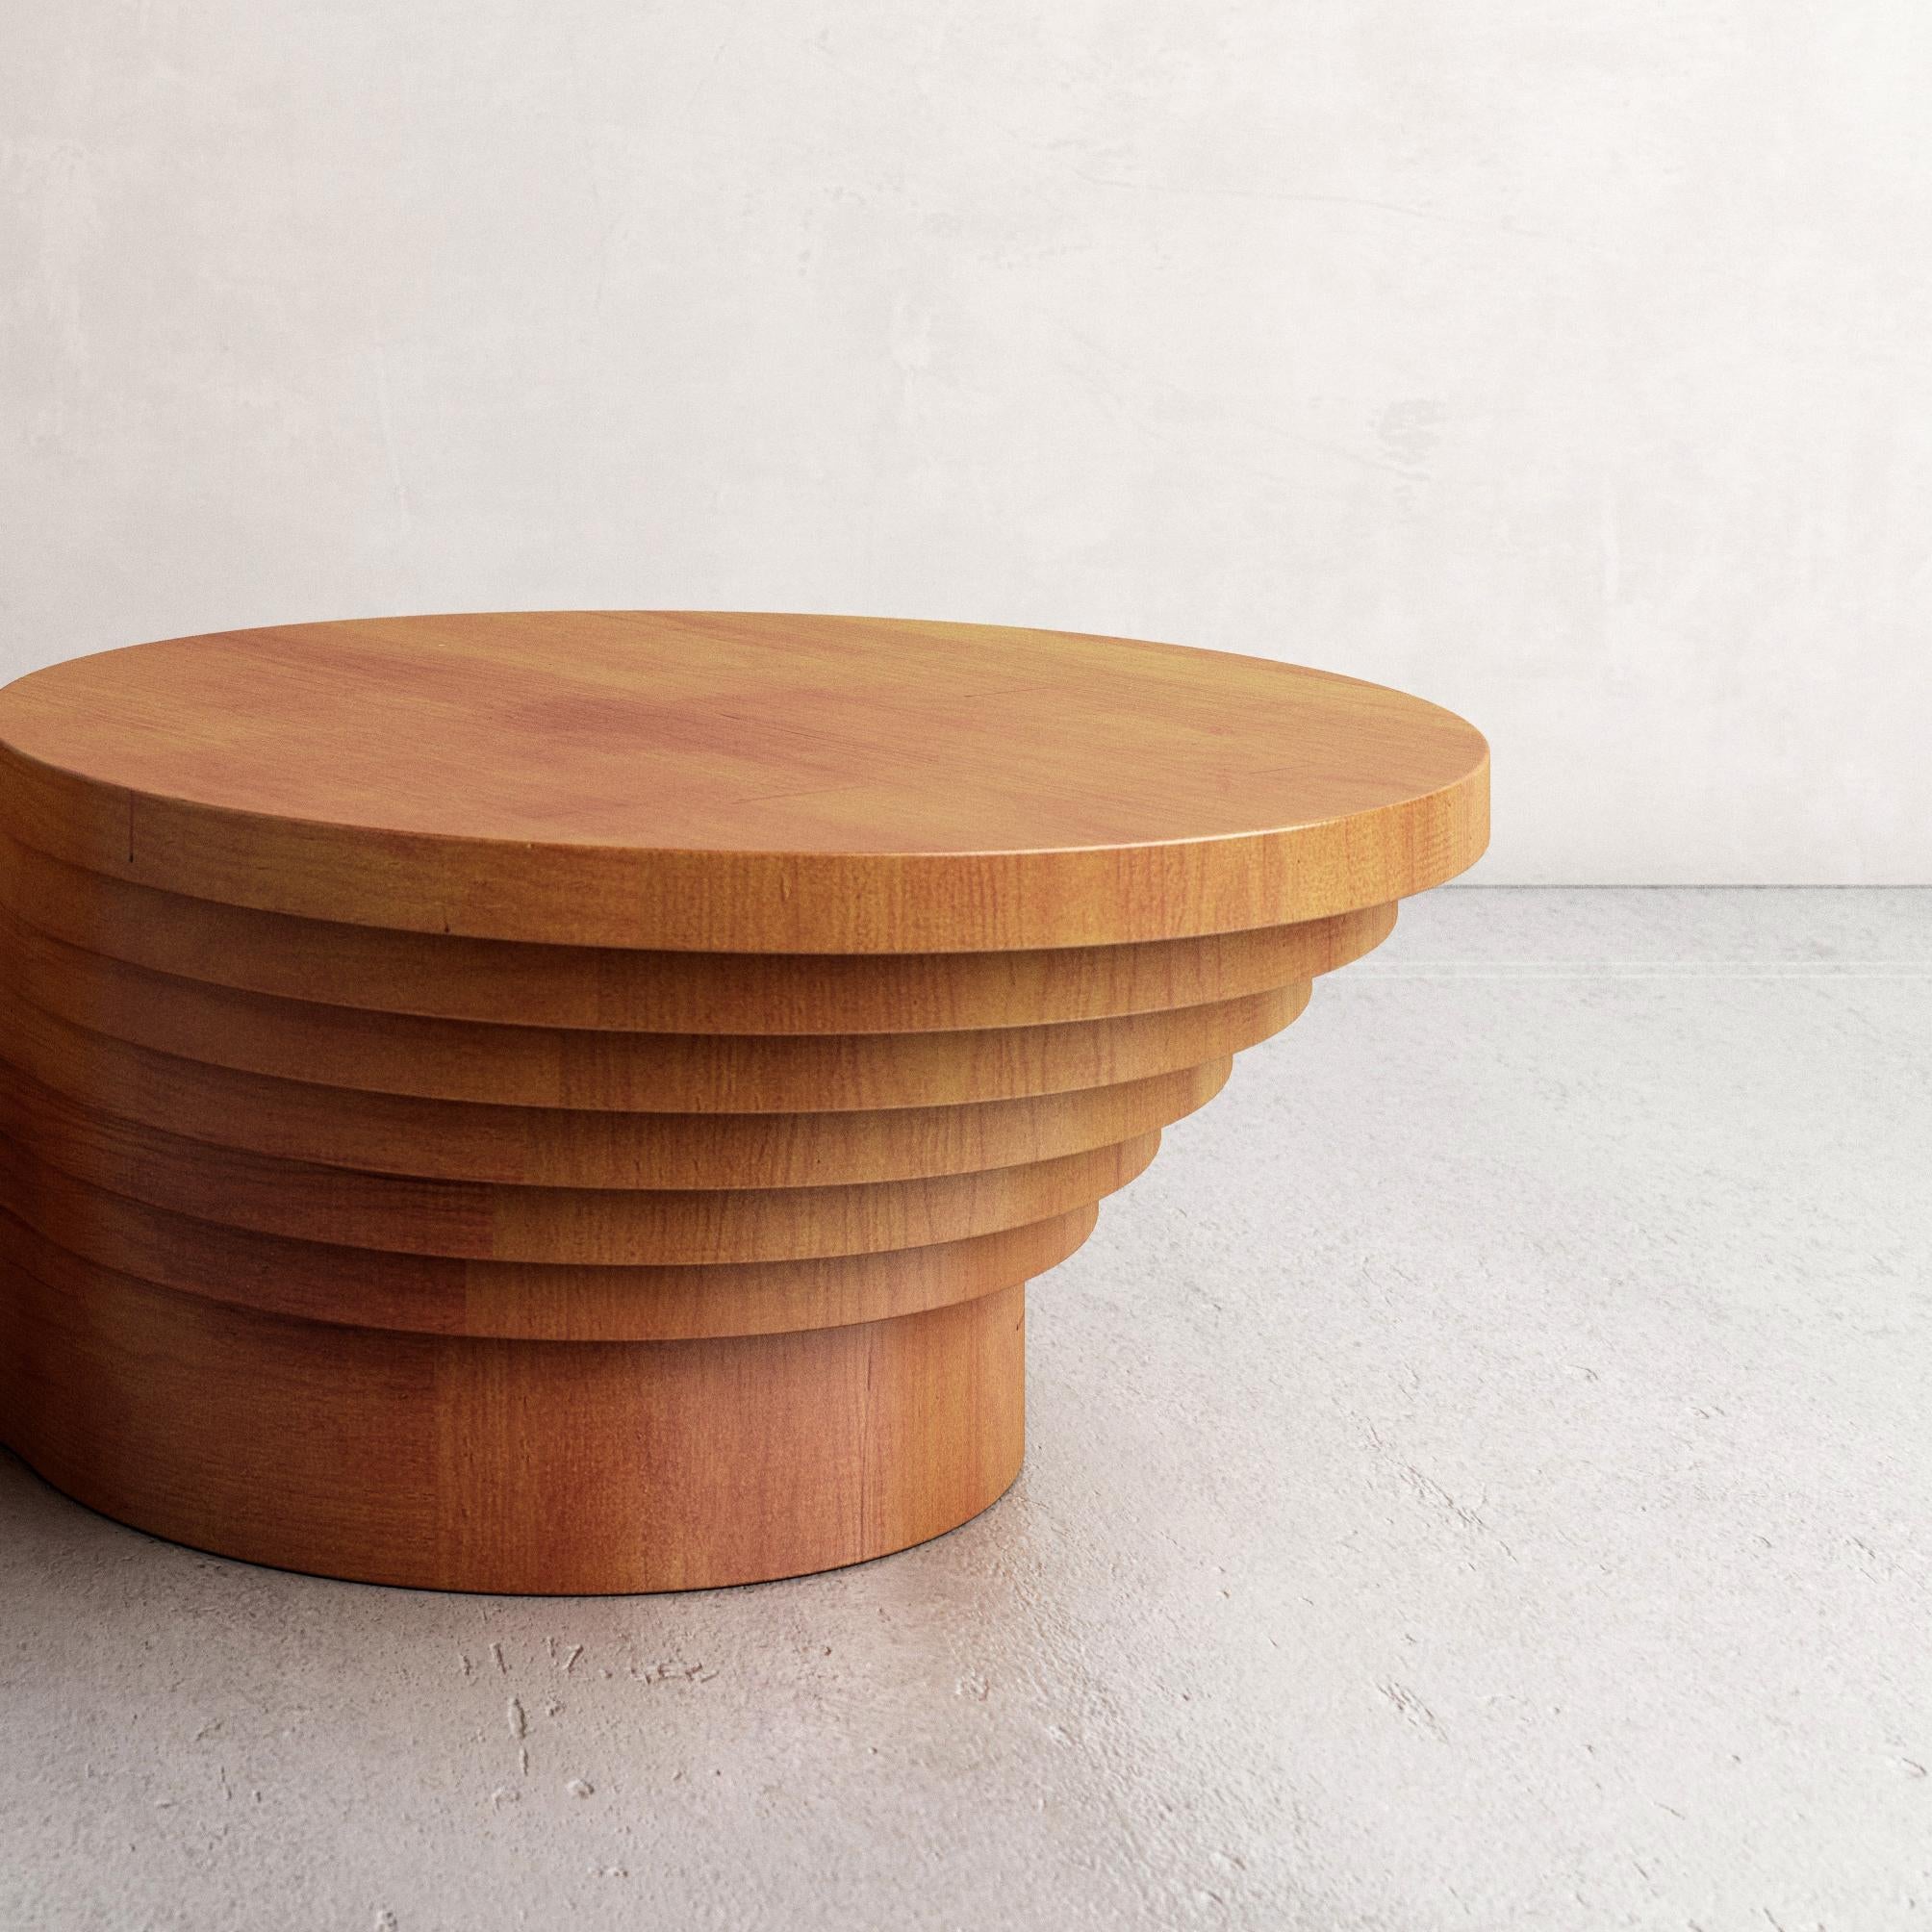 Contemporary Wood Slice Me Up Sculptural Coffee Table by Pietro Franceschini For Sale